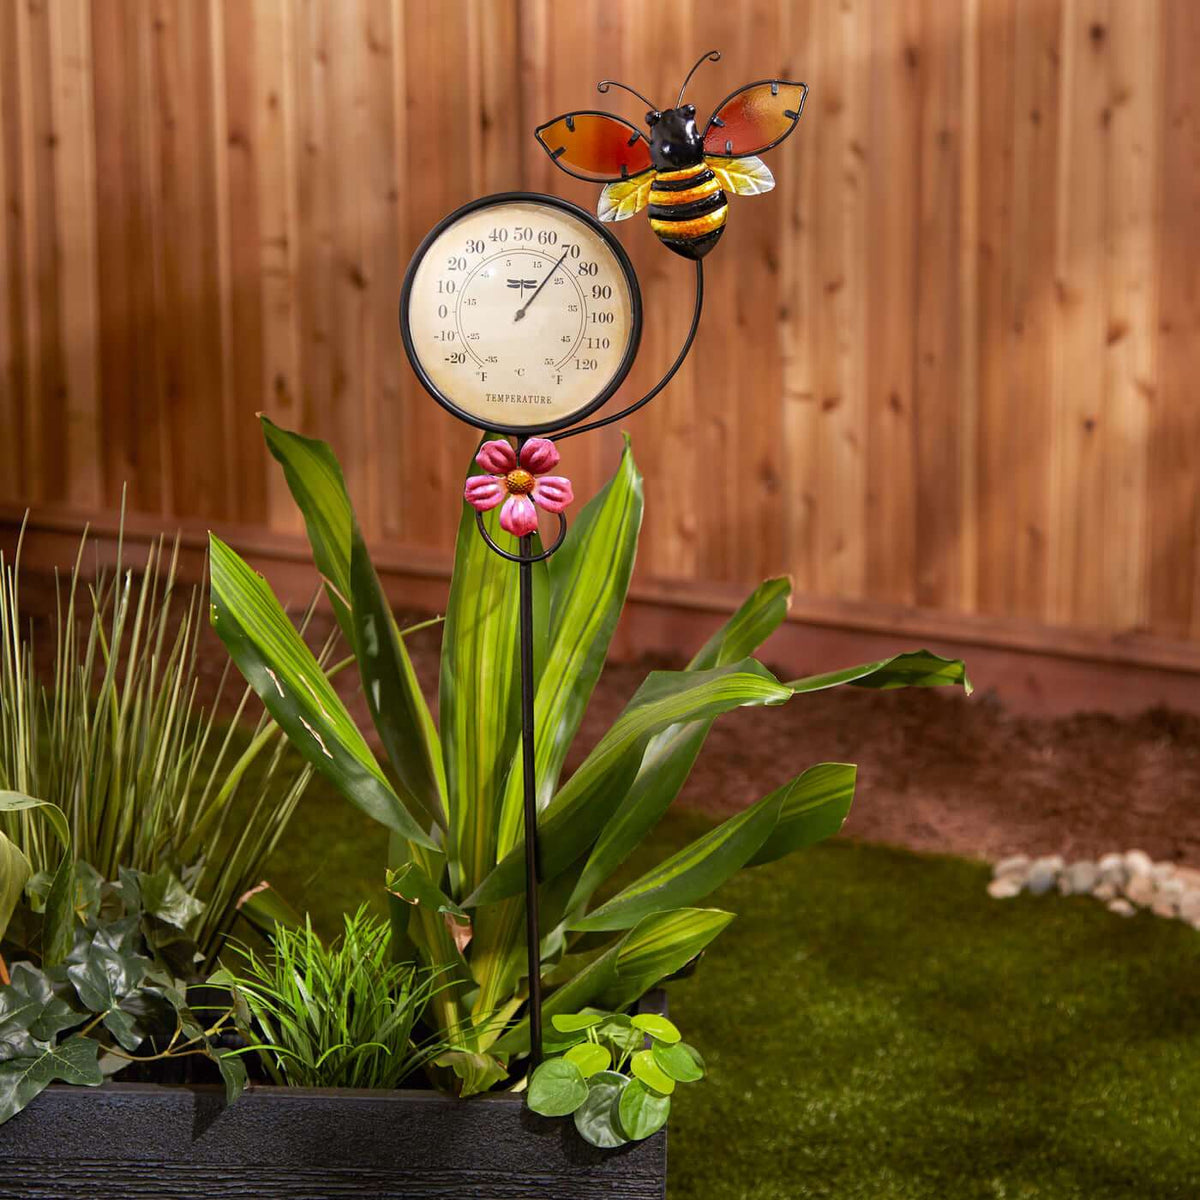 Butterfly and Dragonfly Thermometer Garden Stake